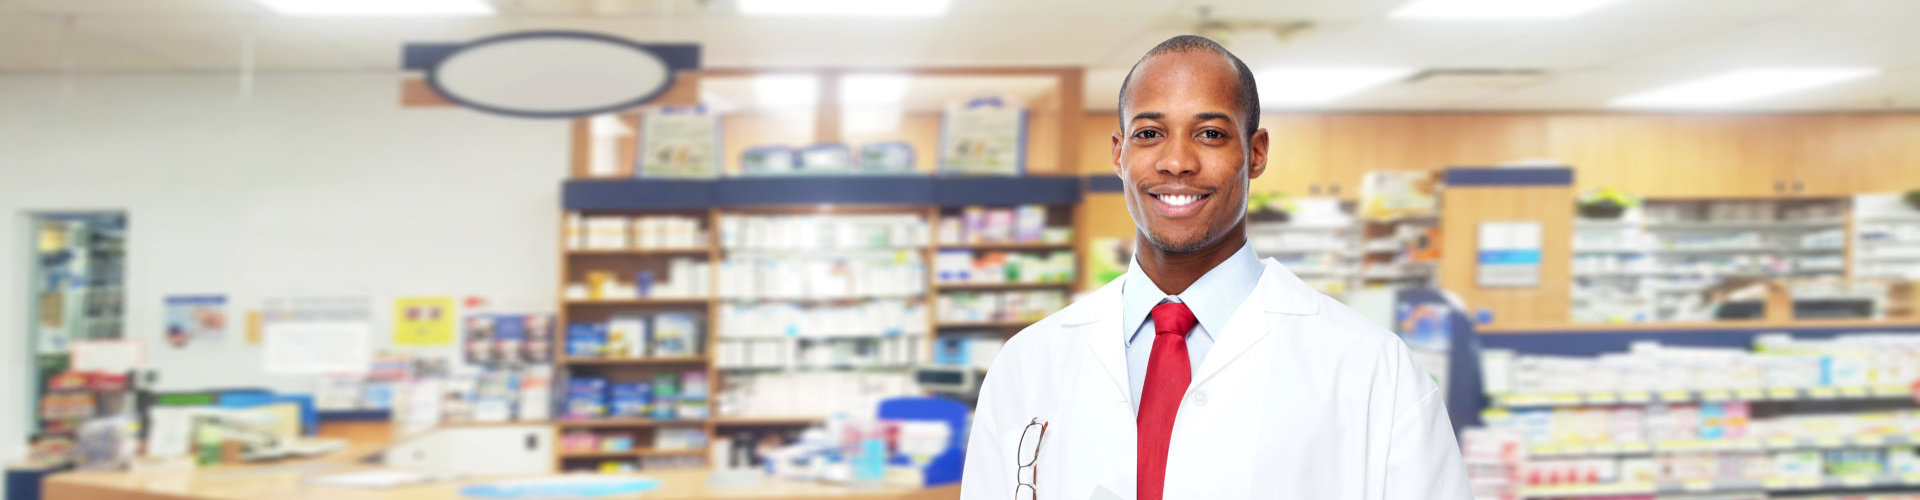 male pharmacist inside pharmacy standing and smiling